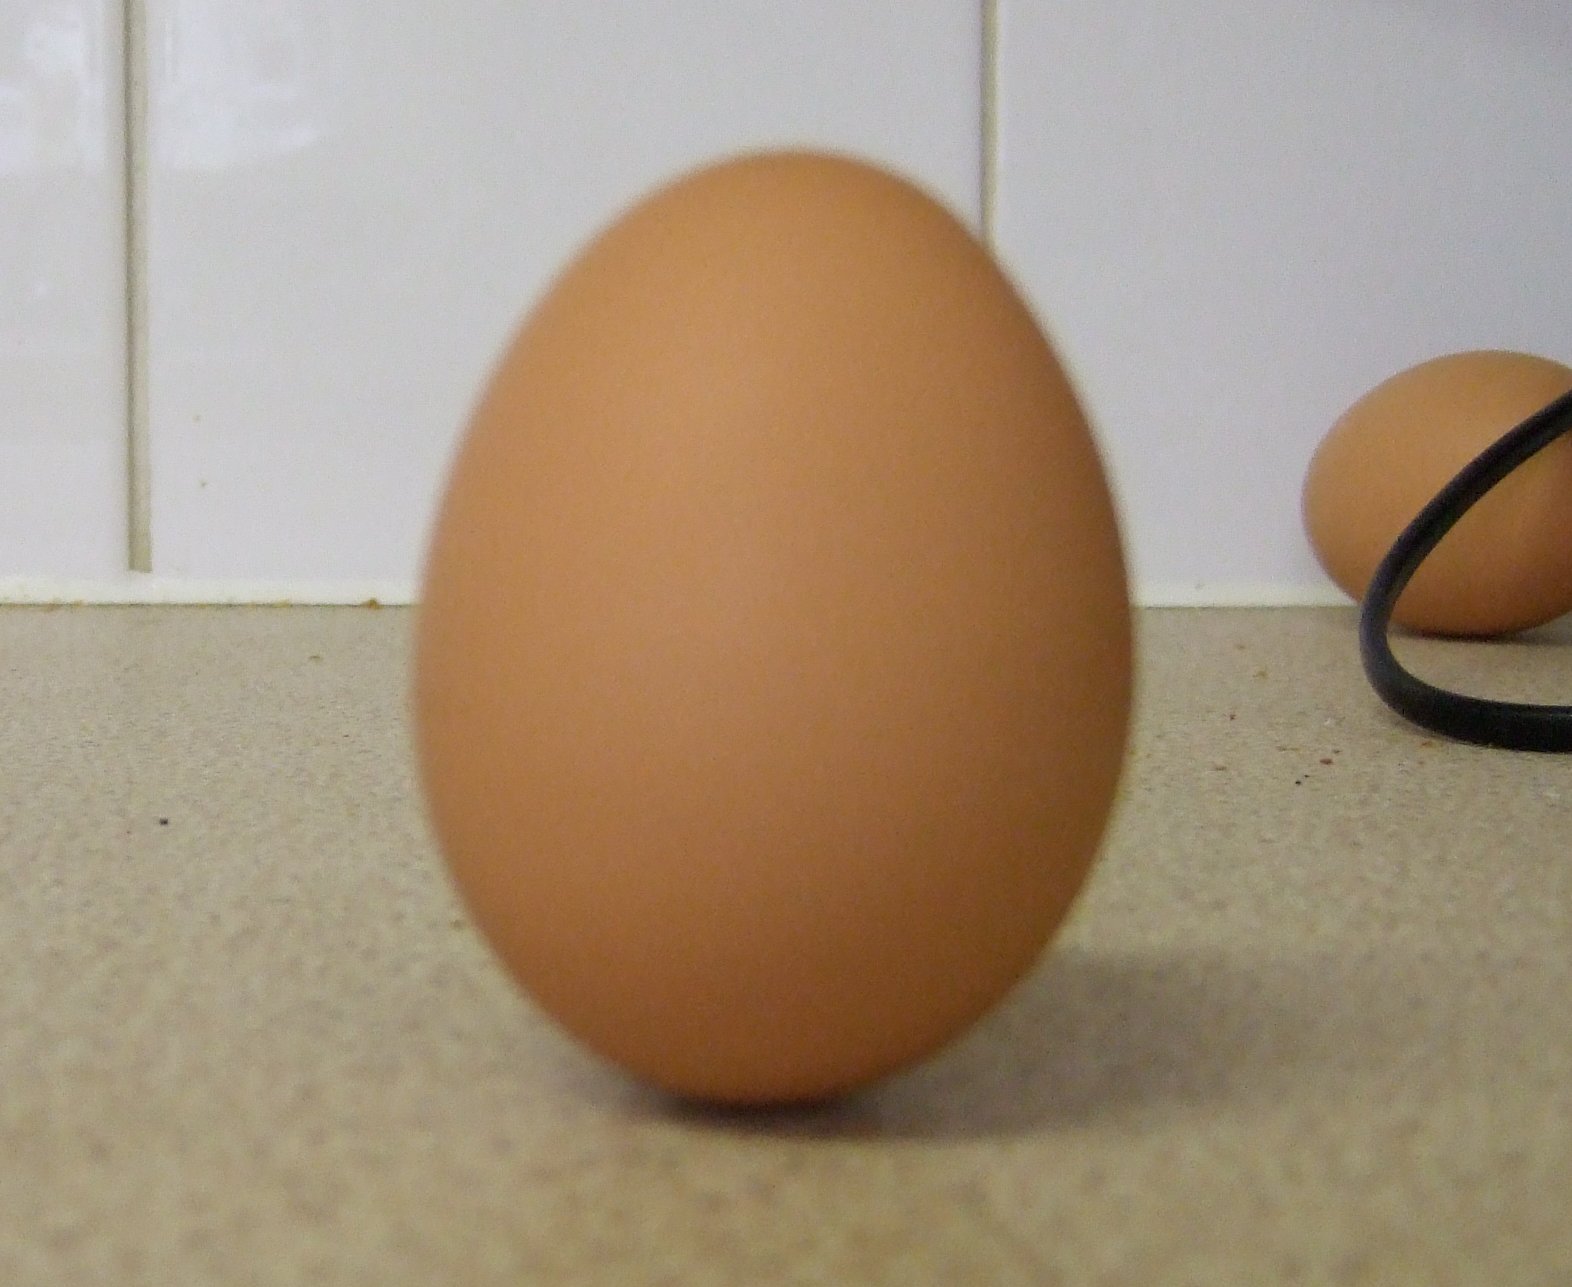 The egg stands on end